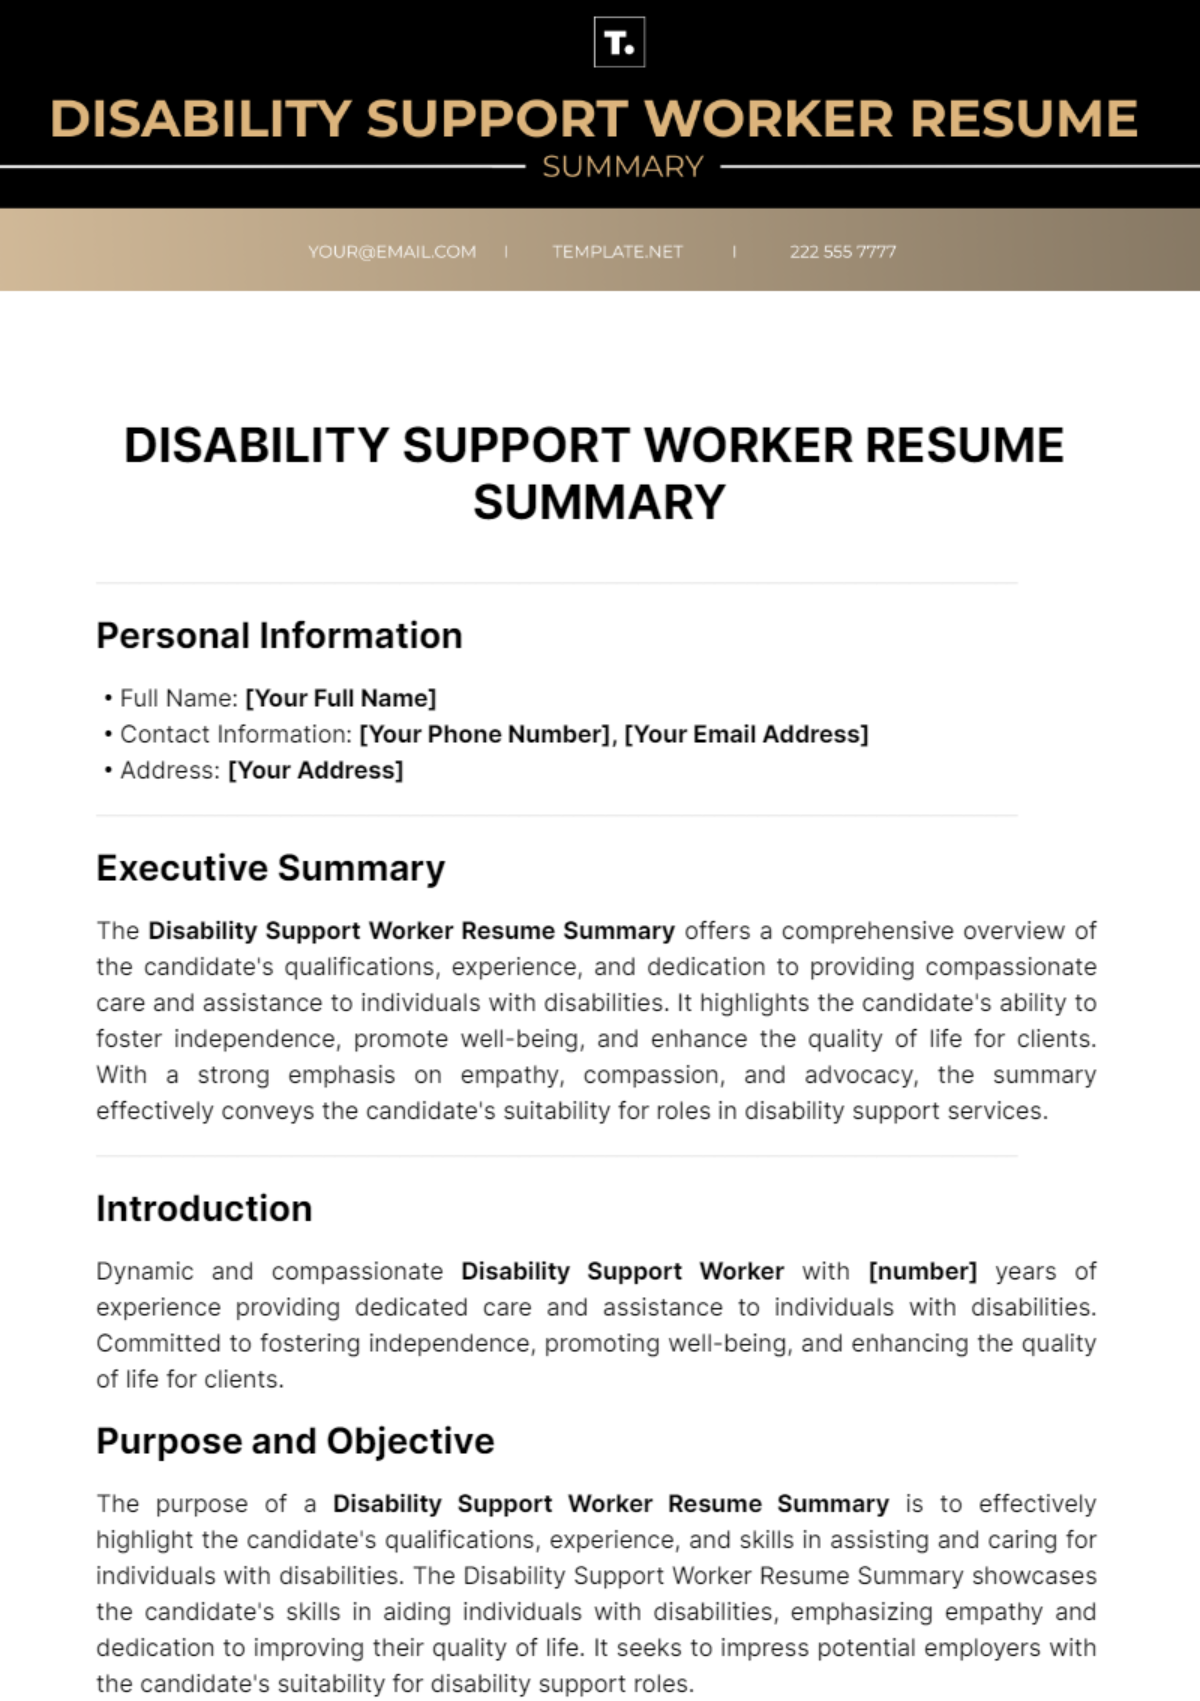 Free Disability Support Worker Resume Summary Template